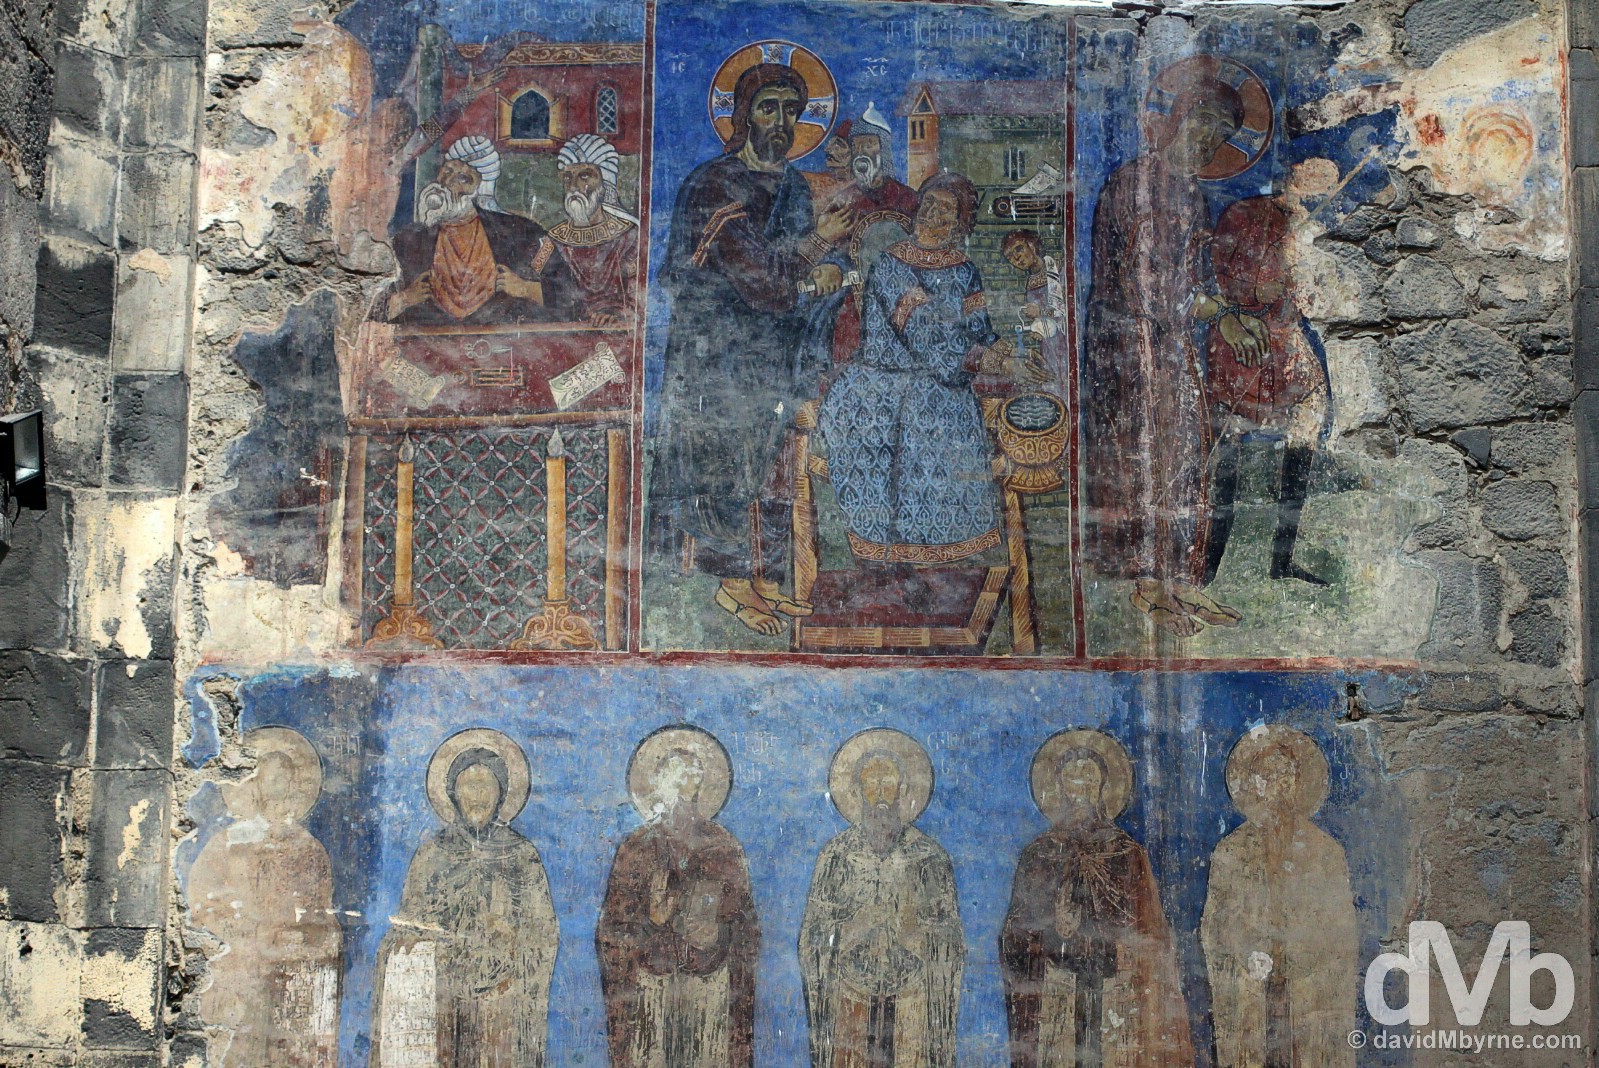 Murals on the walls of the Akhtala Monastery in Lori Marz, Armenia. March 26, 2015.